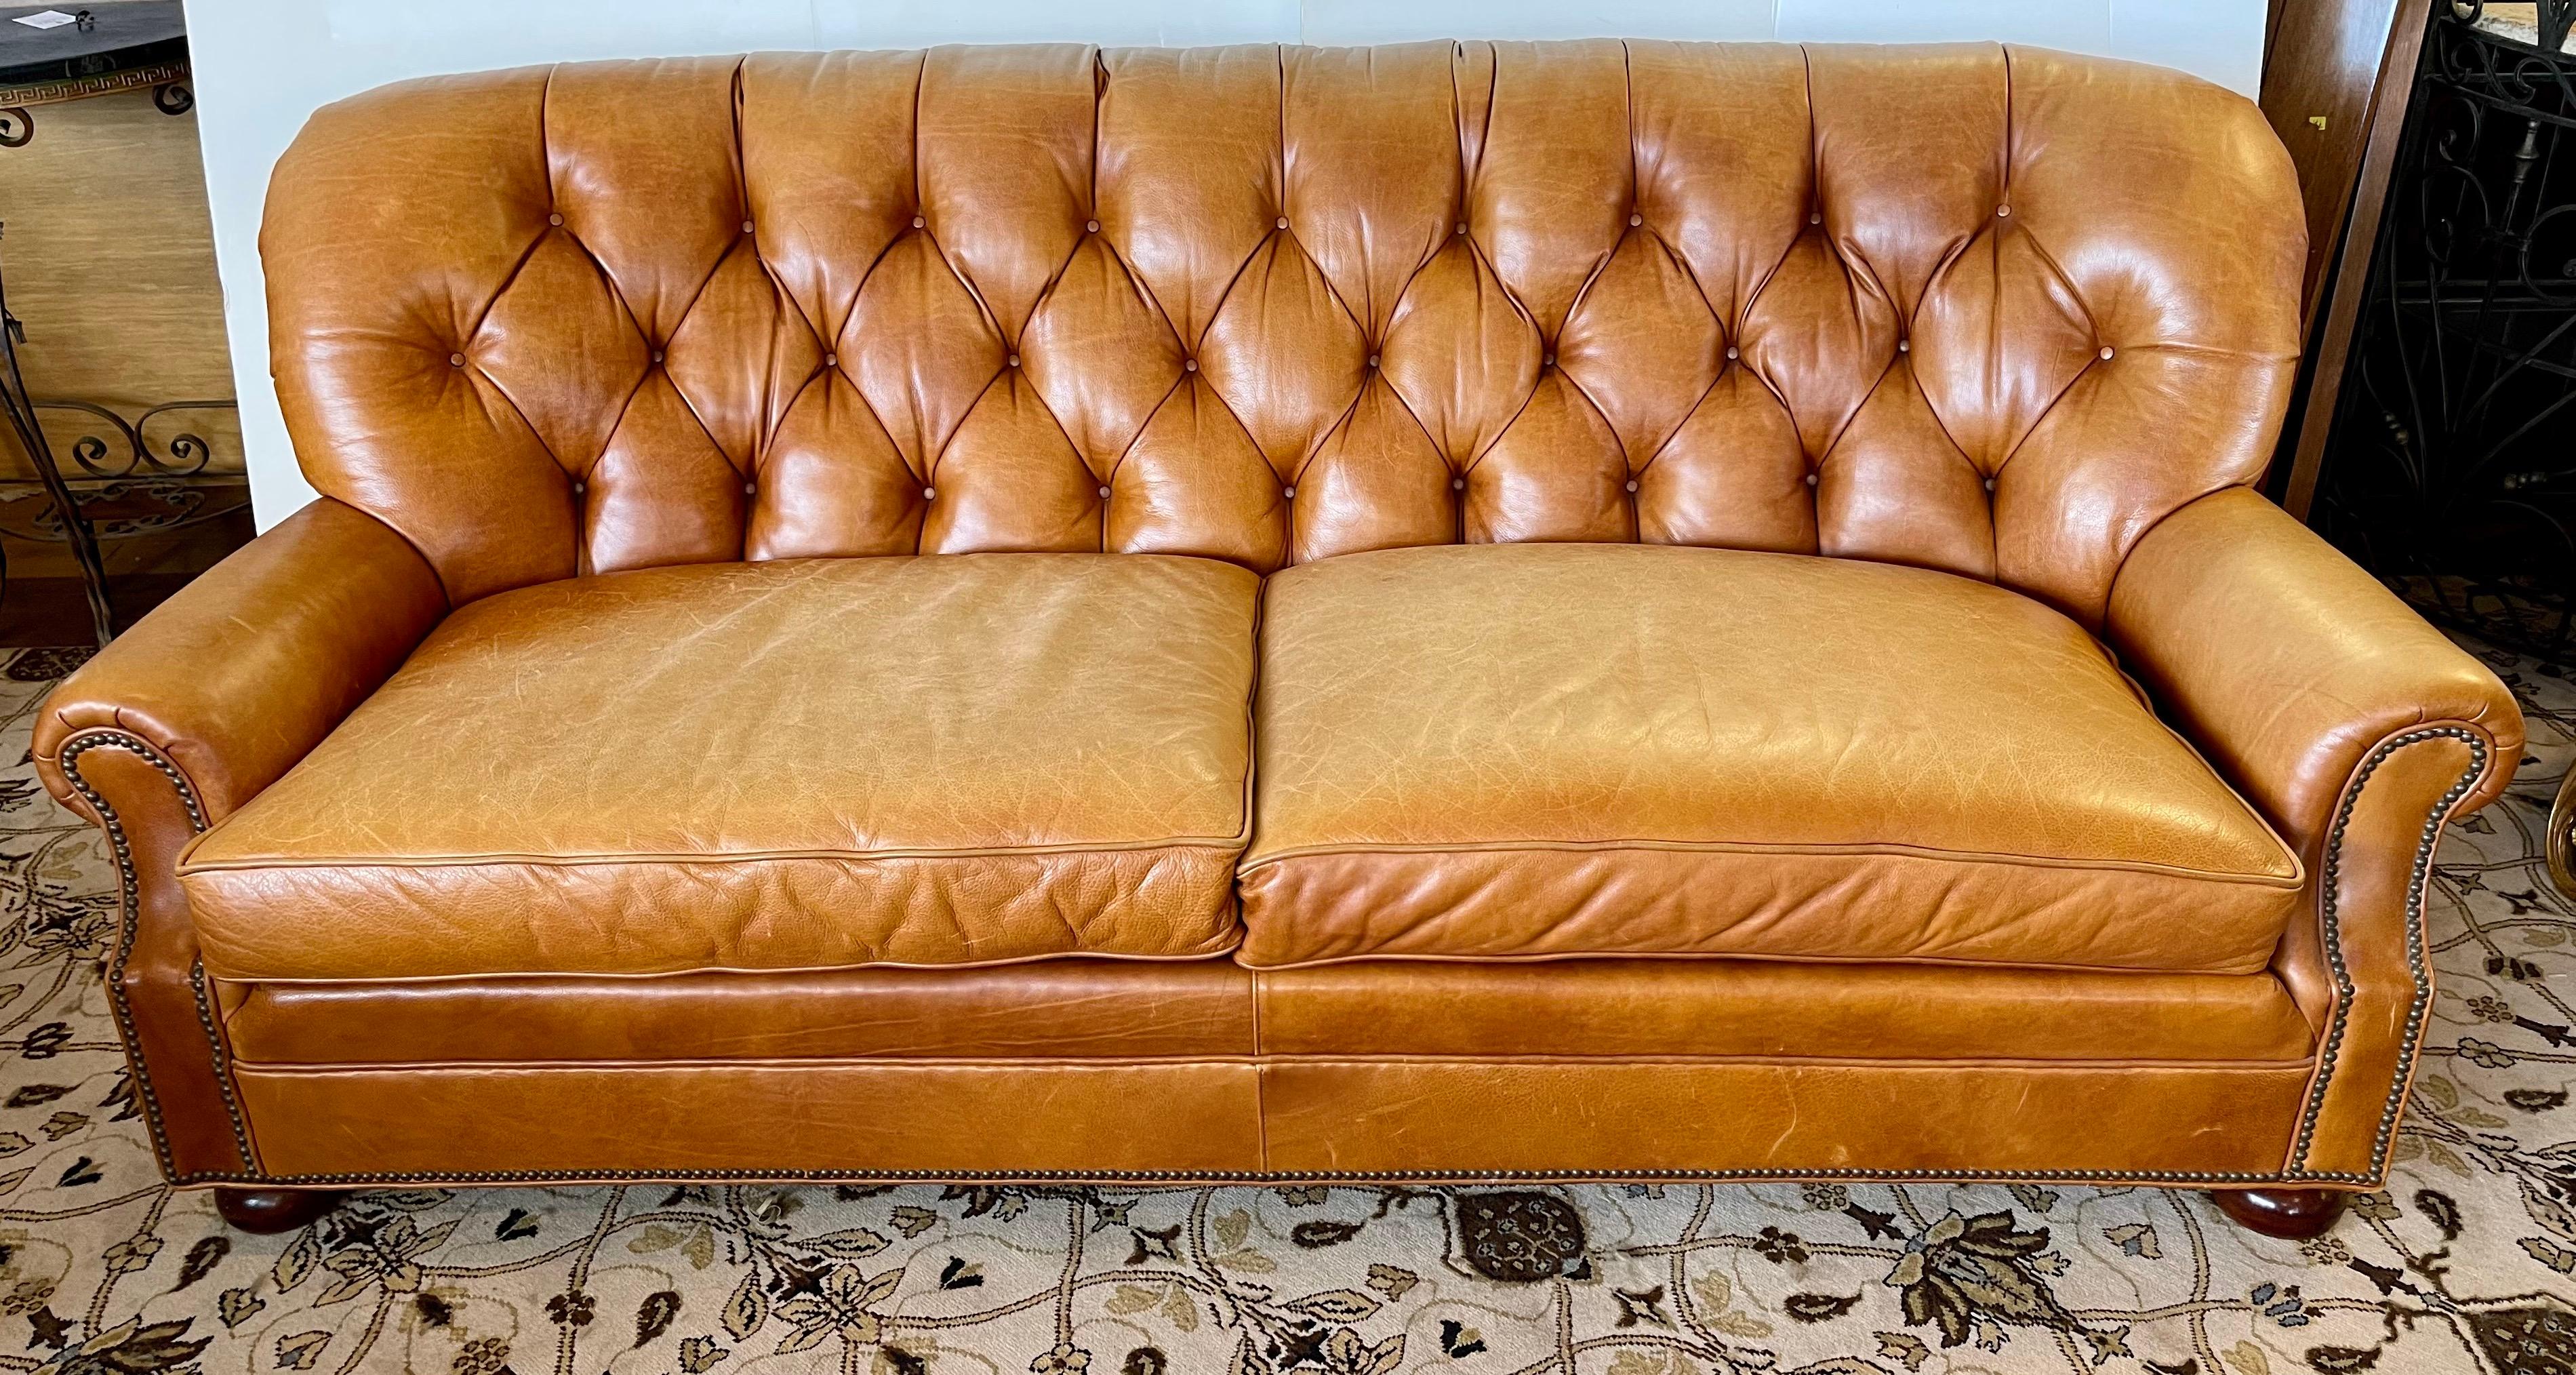 American Vintage Hickory Chair Furniture Company Chesterfield Tufted Leather Sofa